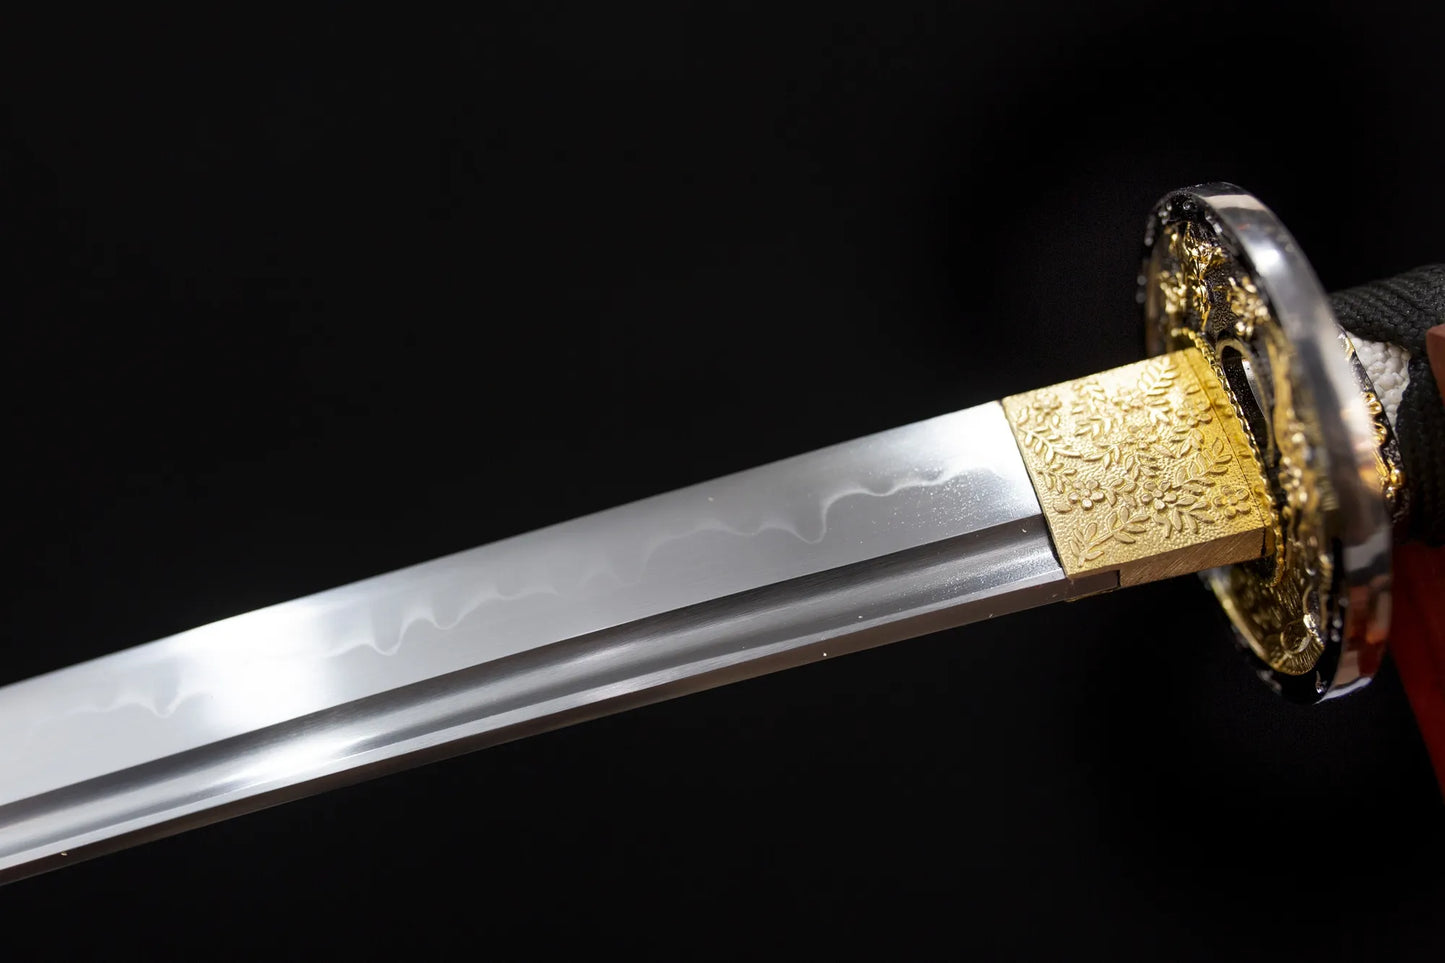 The T10 steel forged samurai sword will have a very beautiful HAMON